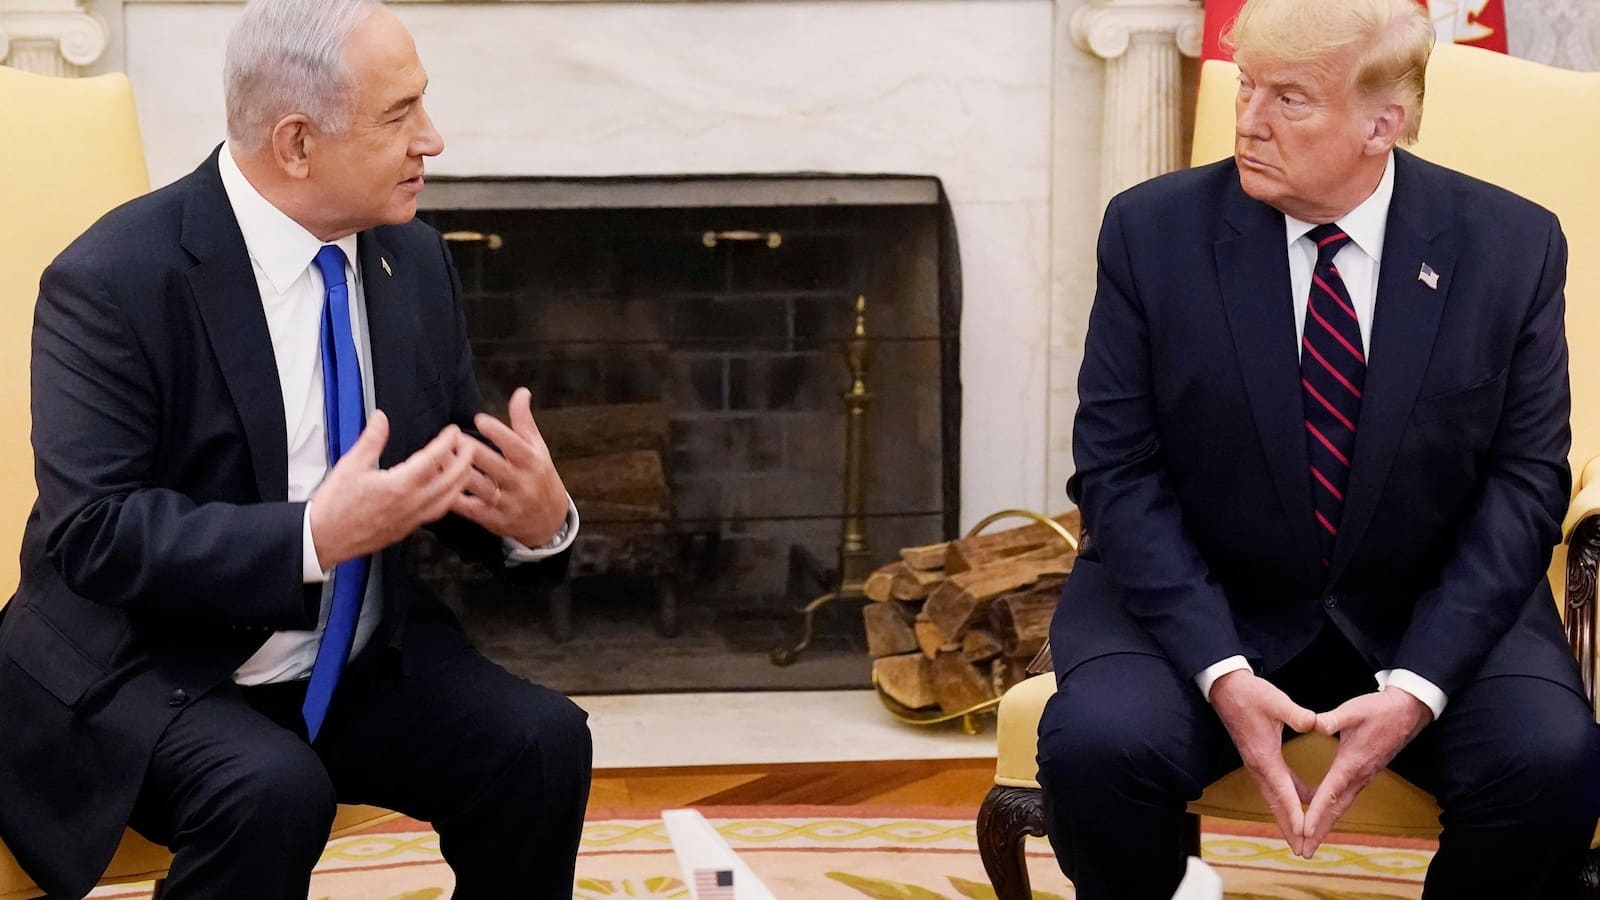 2024 Election Latest: Harris urges people to vote as campaign heats up, Trump meets with Netanyahu